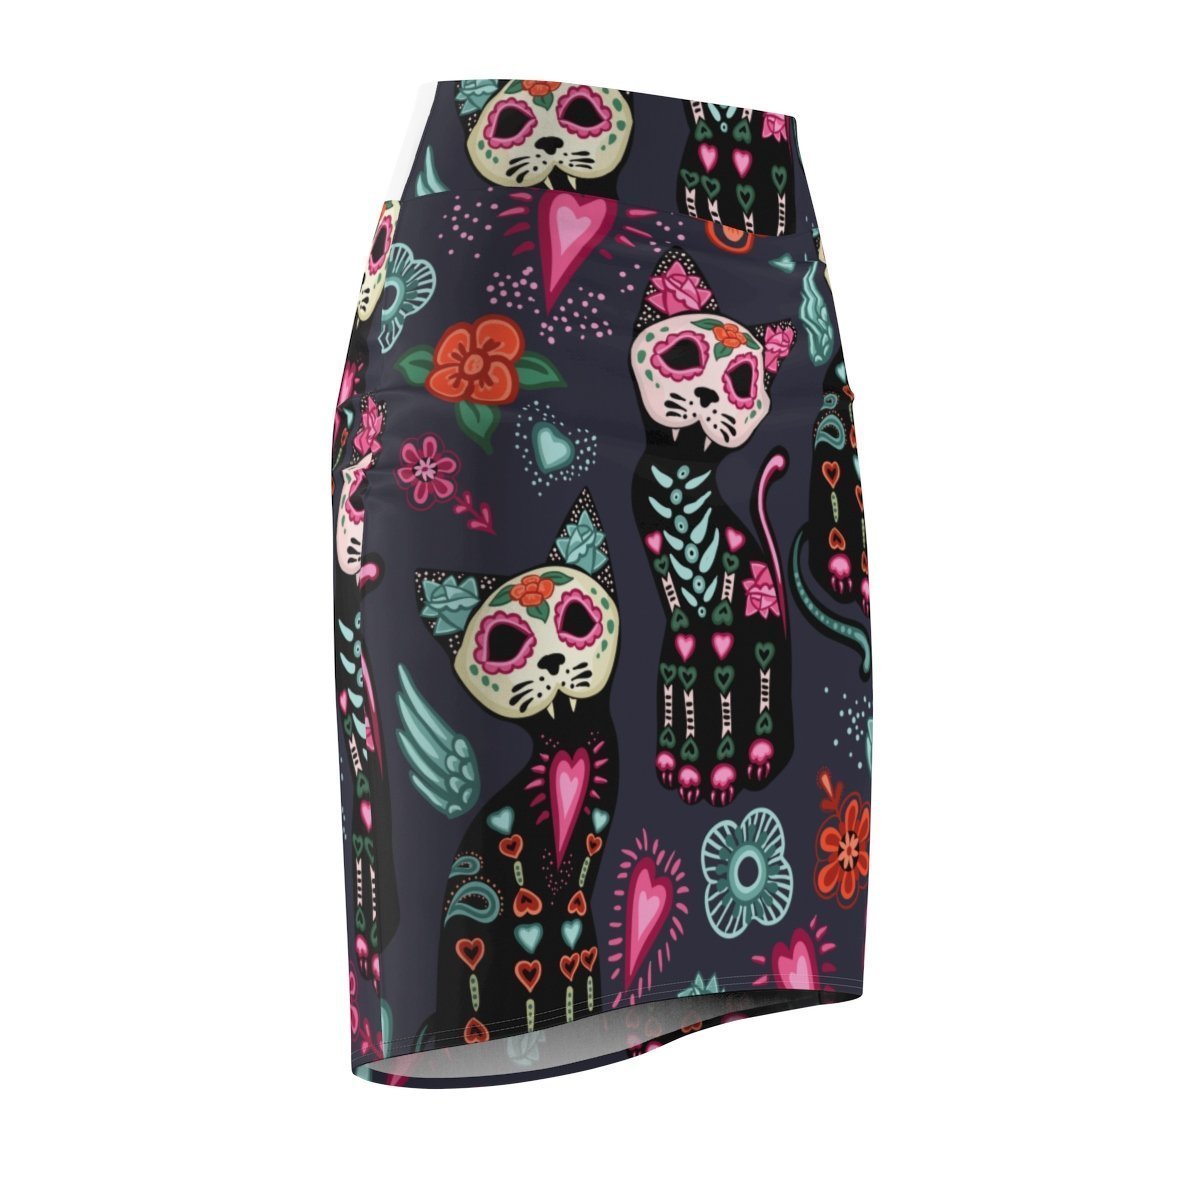 Fun Clothes for Cat Ladies, Cat Skirt Printed with Cool Skeleton Cats